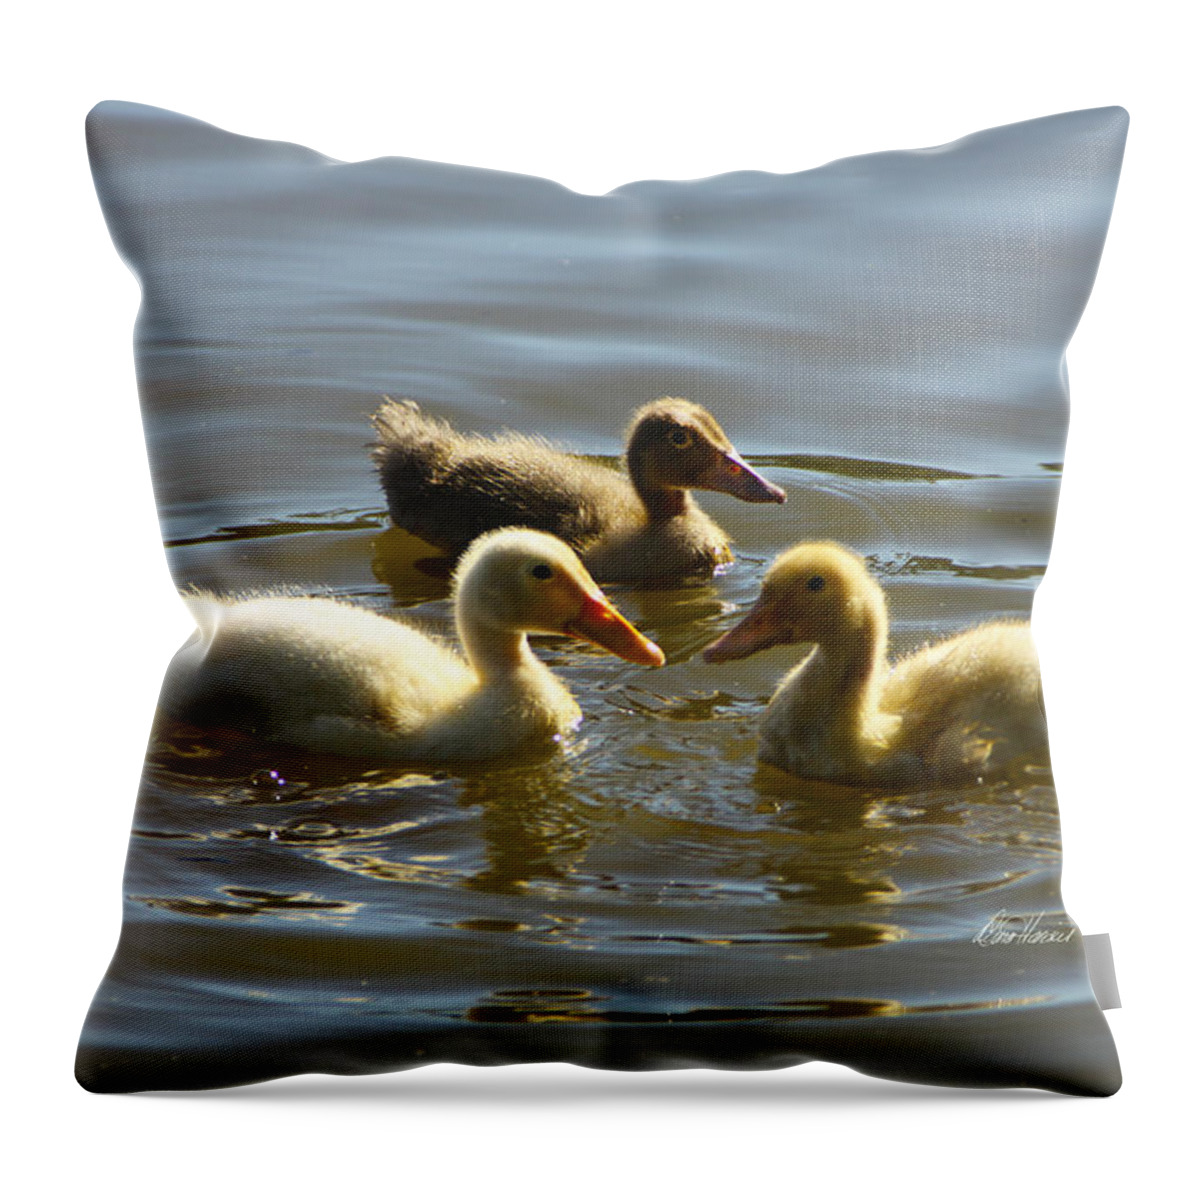  Baby Throw Pillow featuring the photograph Three Baby Ducks Swimming by Diana Haronis